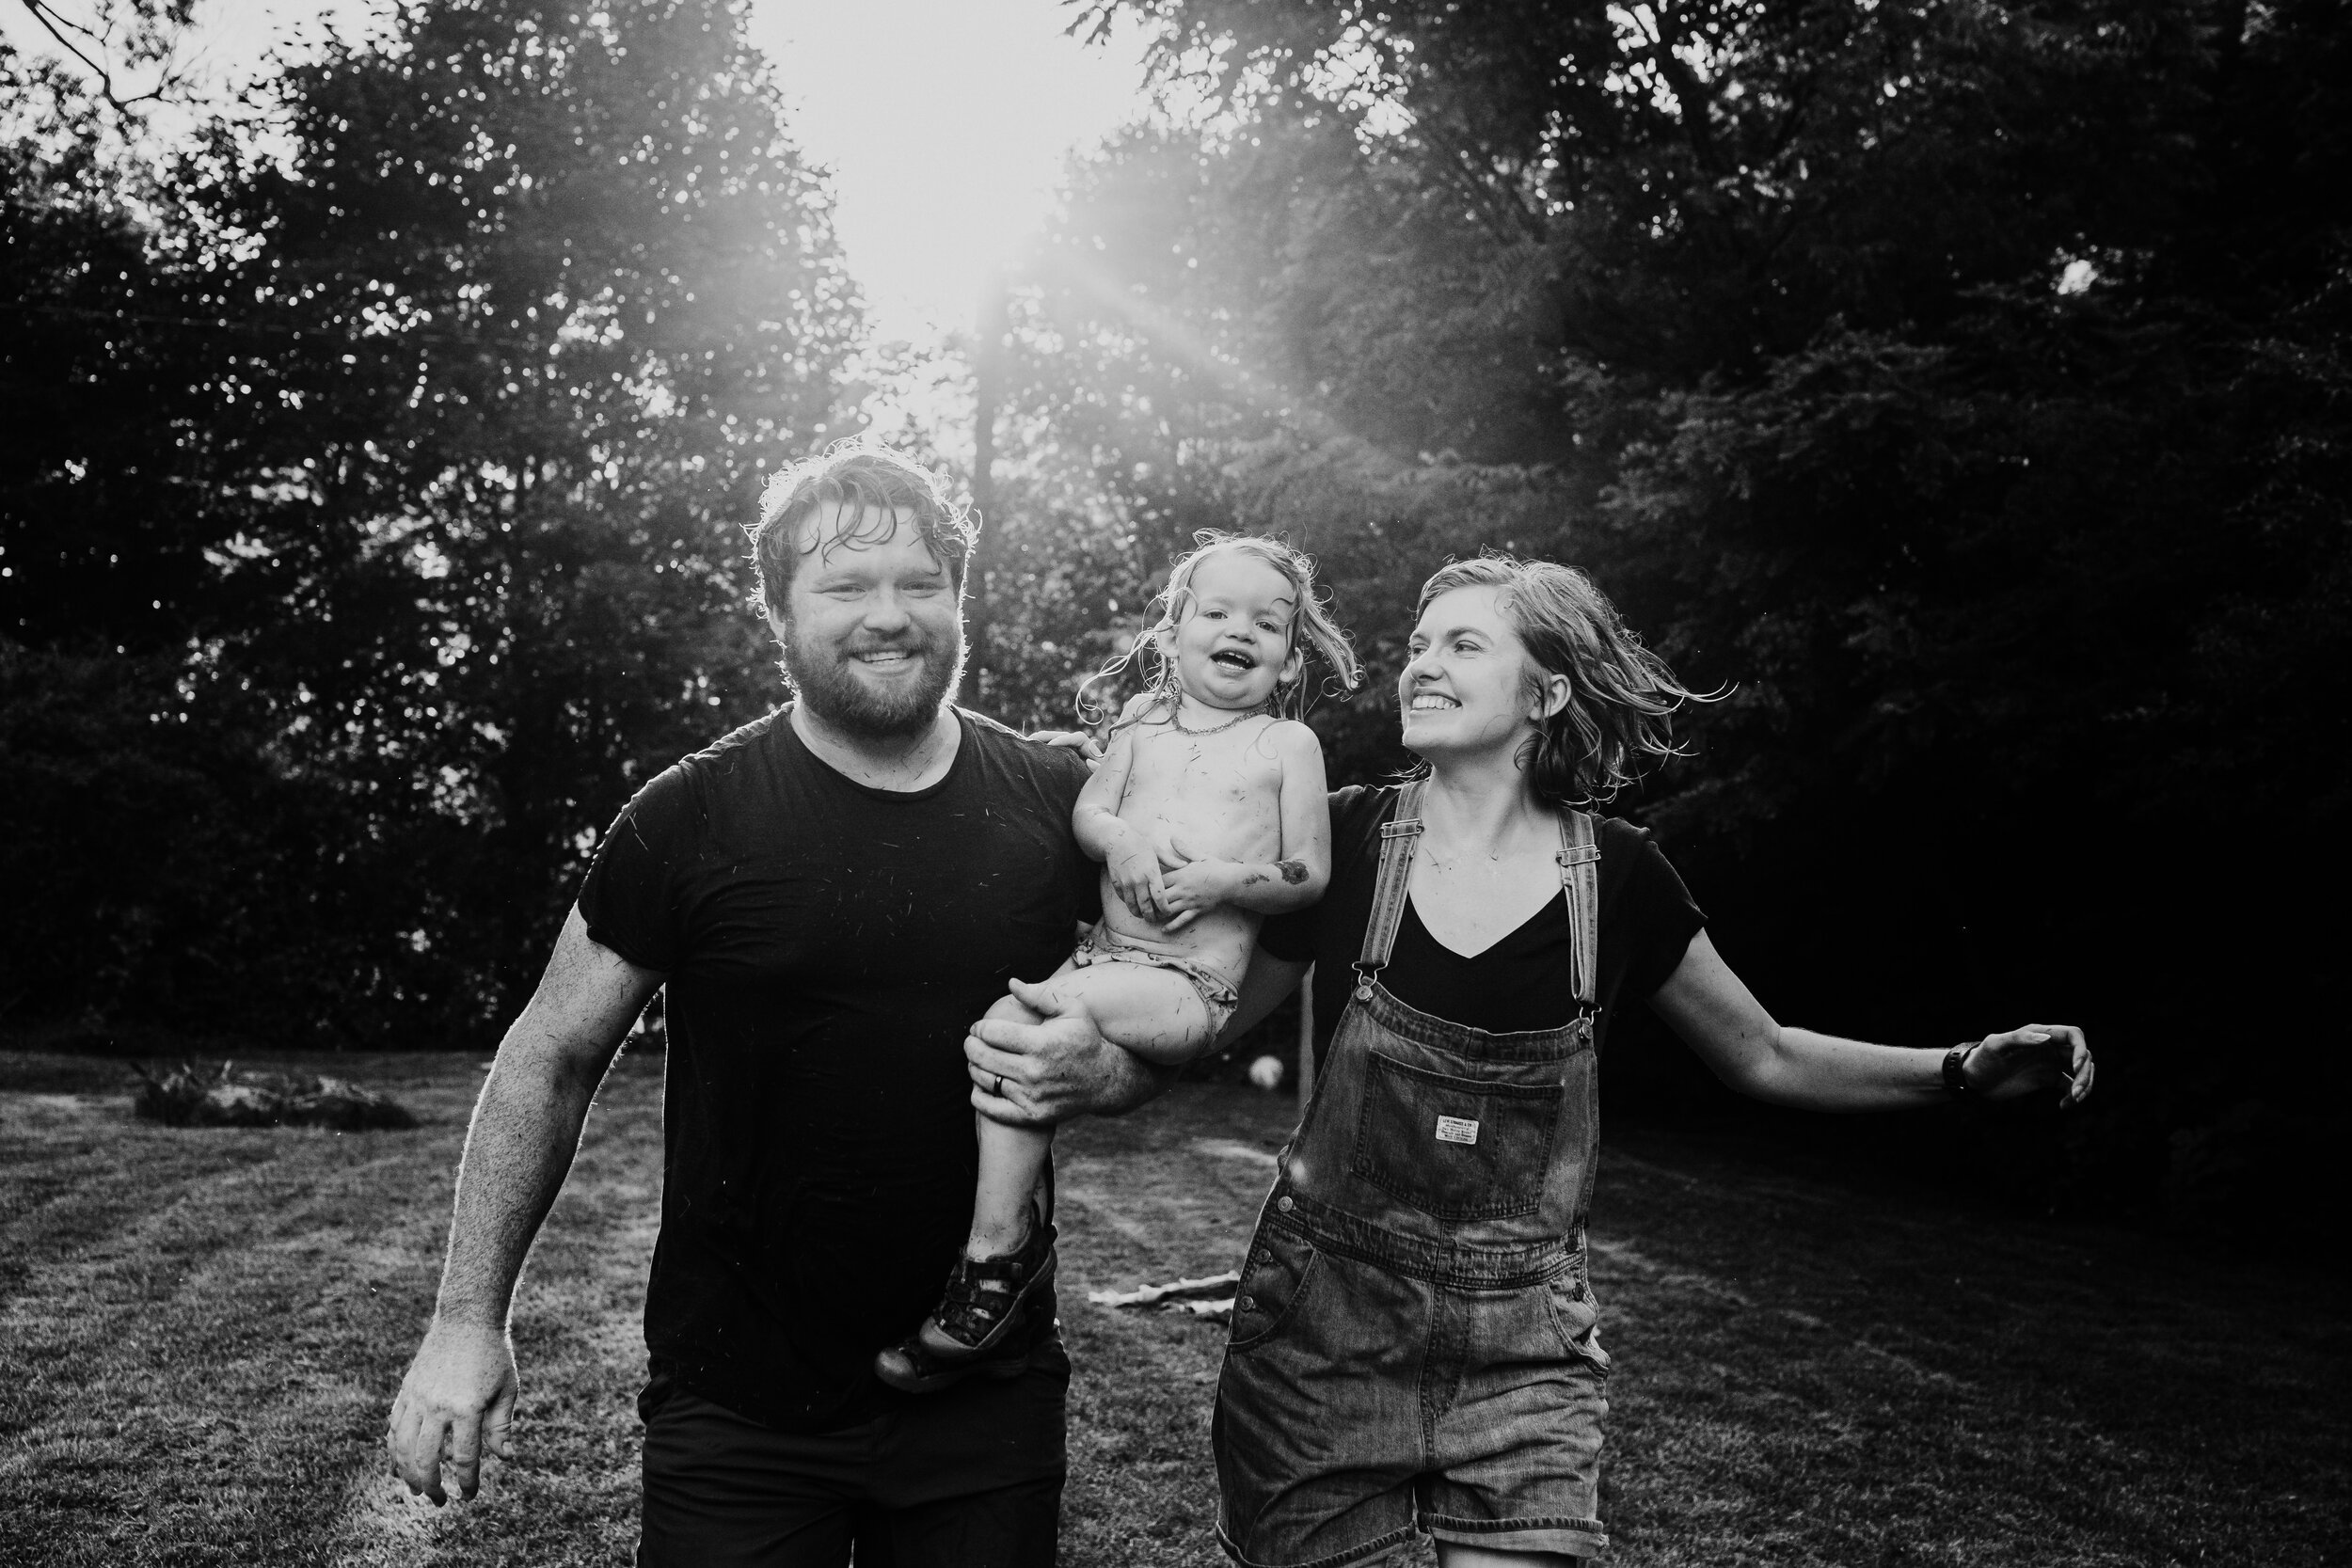 family of three laugh together running in their yard at sunset in black and white 